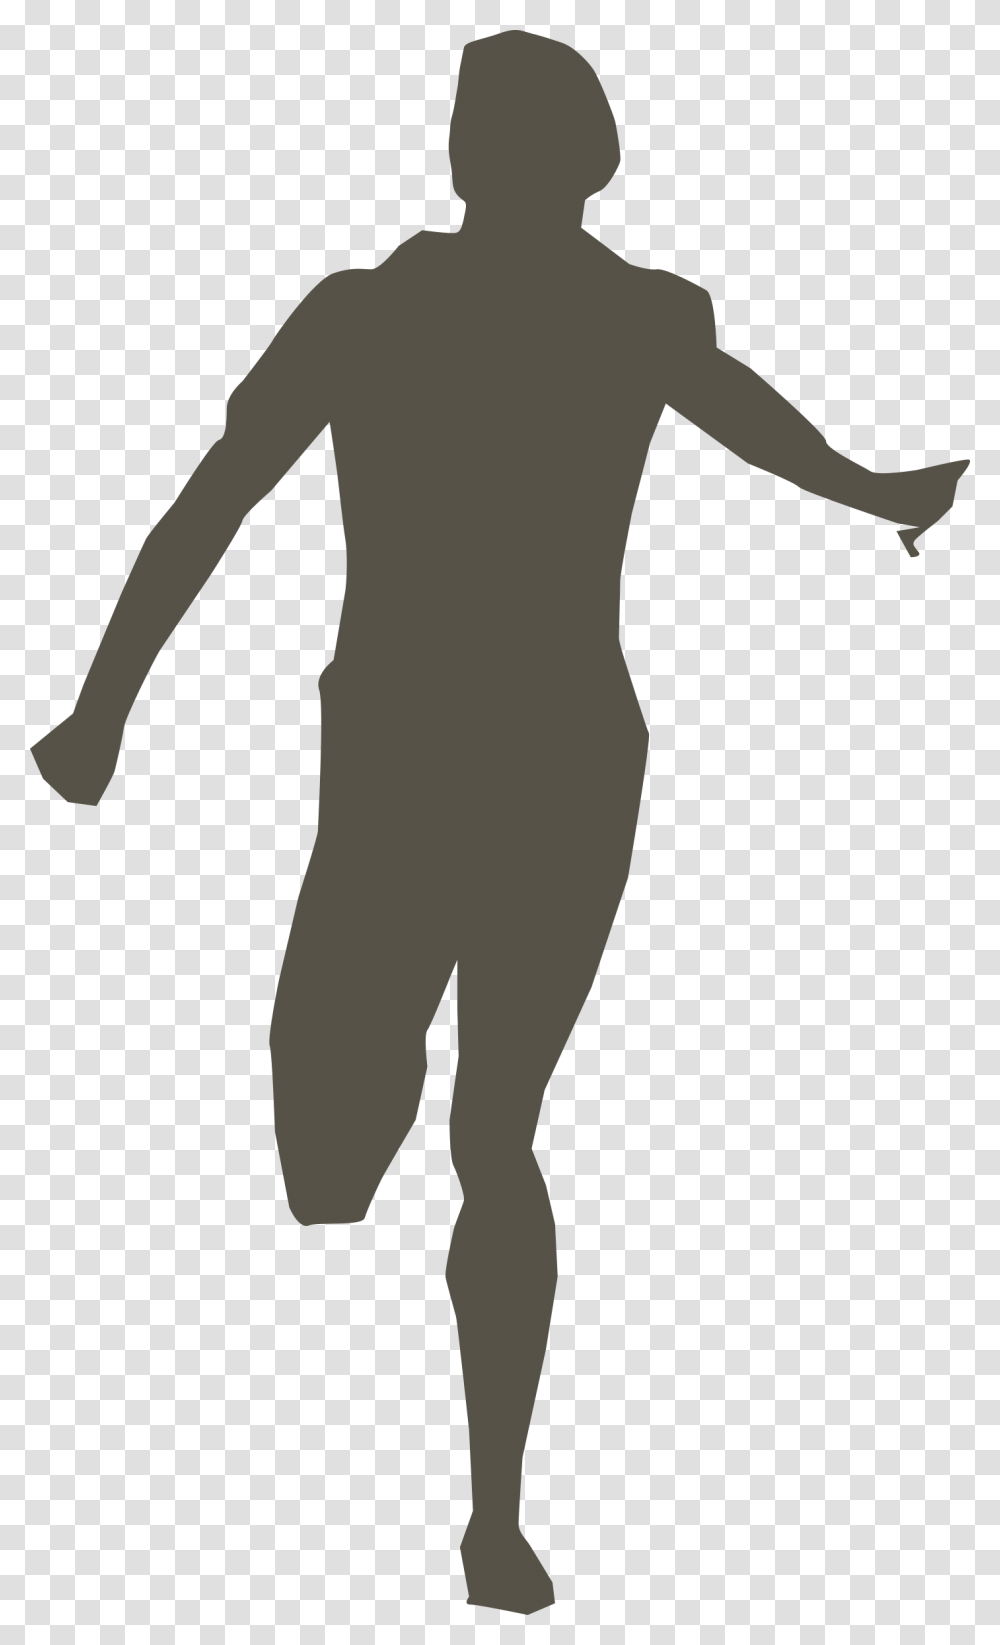 People Running Silhouette Images Silhouette Running Man, Person, Hand, Standing, Stencil Transparent Png